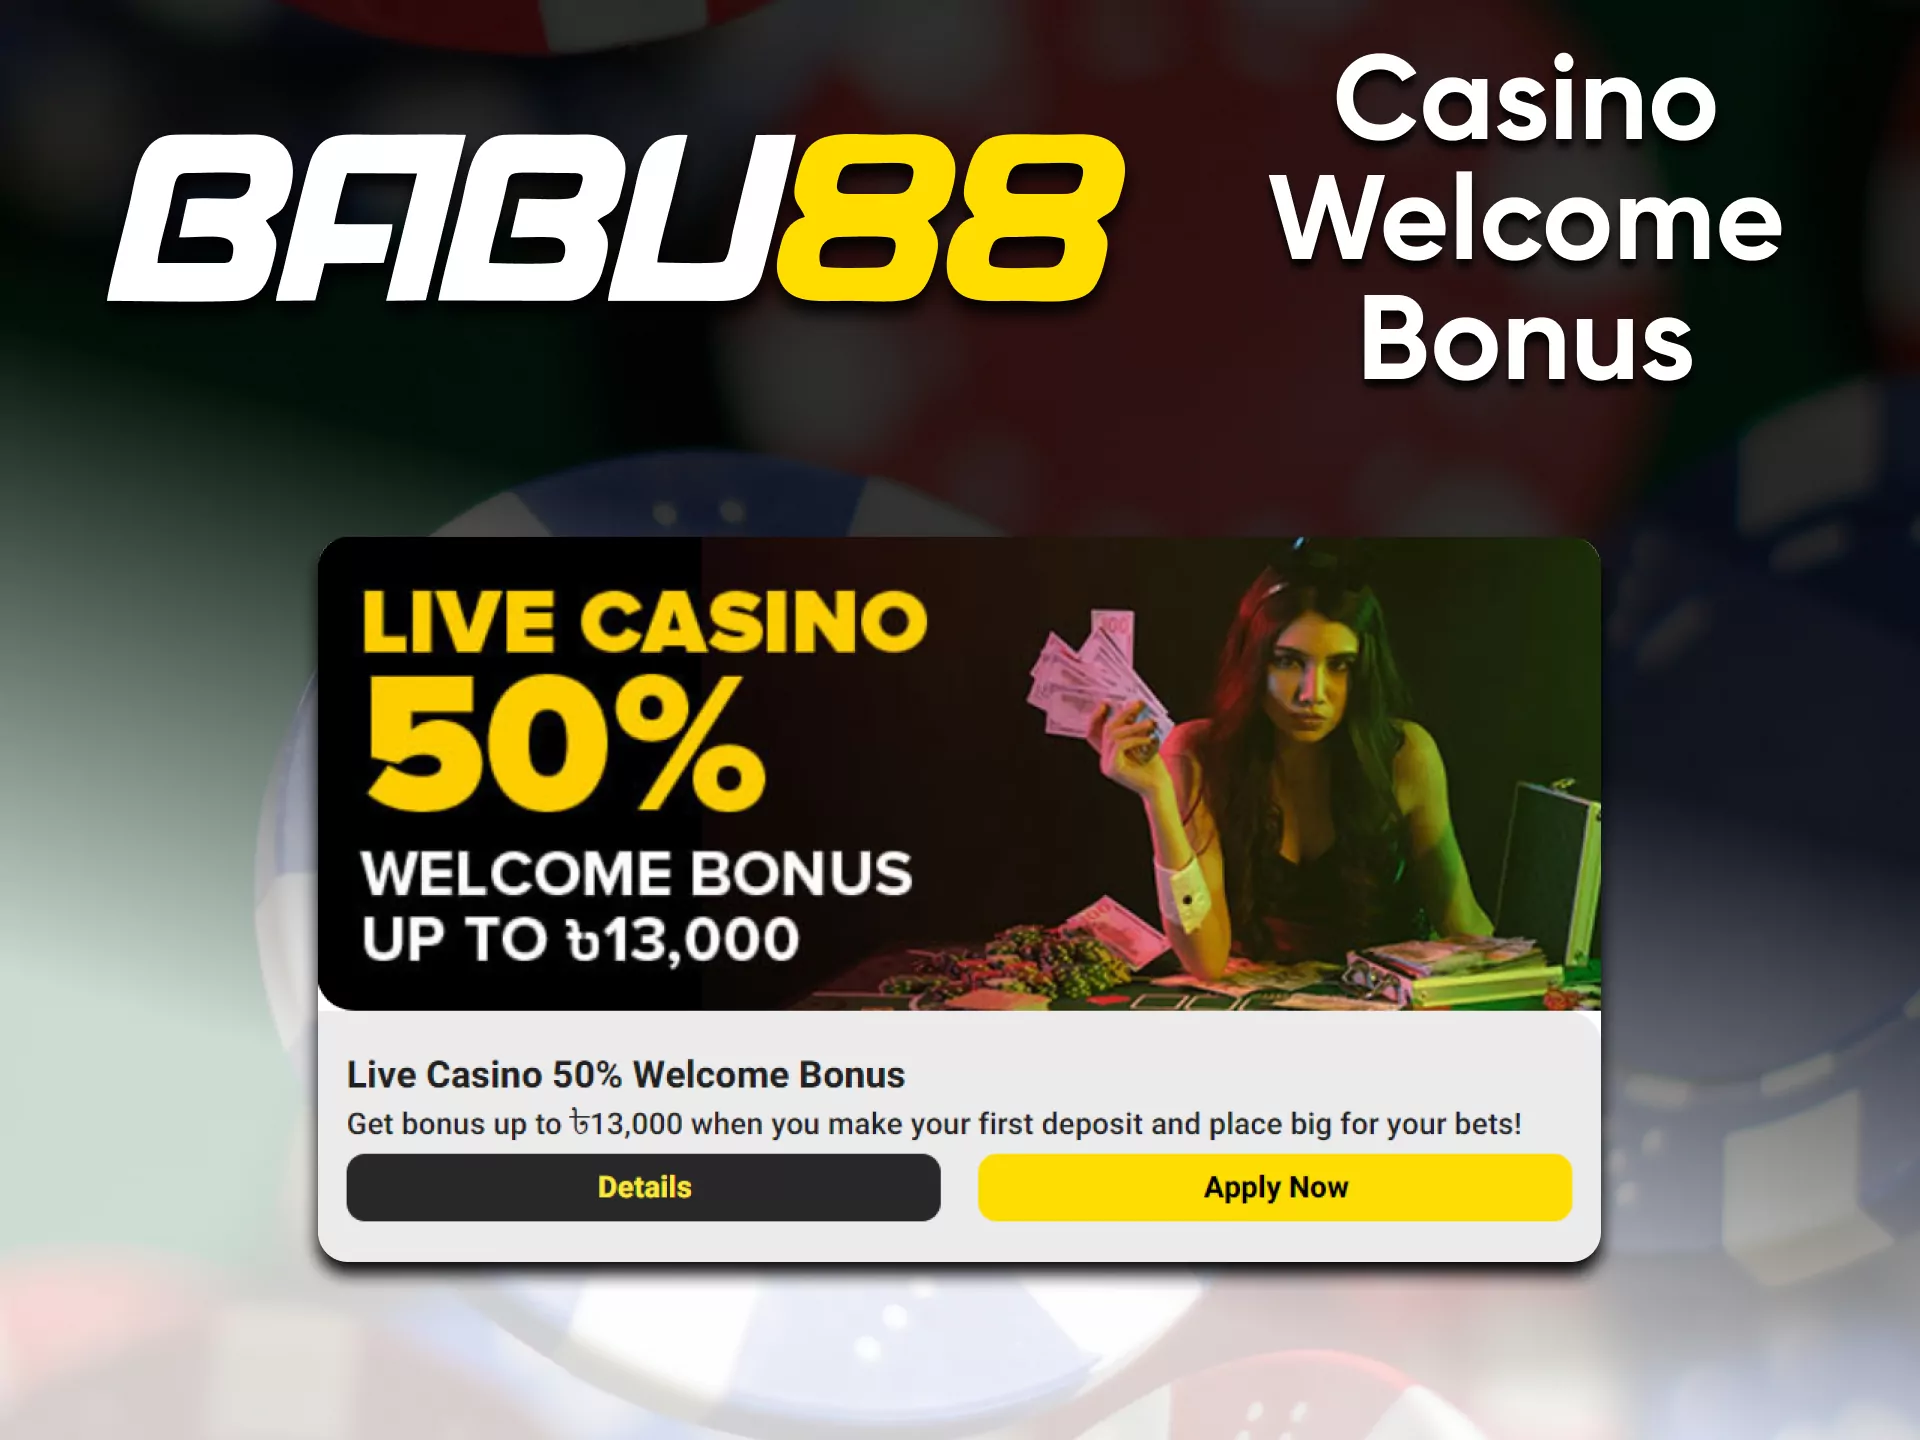 Top up your gaming account at Babu88 Casino and get a welcome bonus.